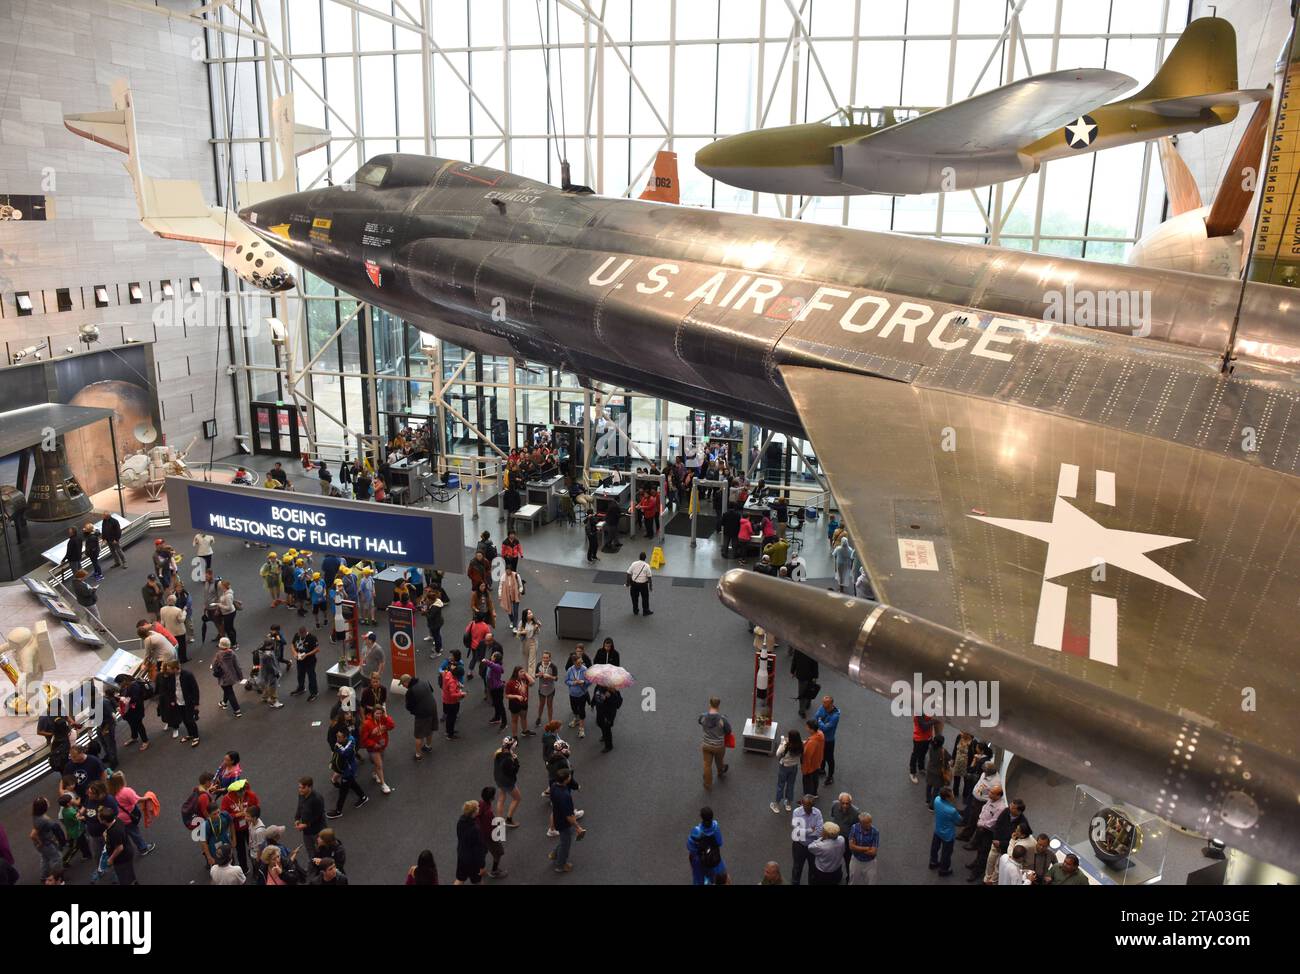 Washington, DC - June 03, 2018: Crowd of people  in the Smithsonian National Air and Space Museum. Stock Photo